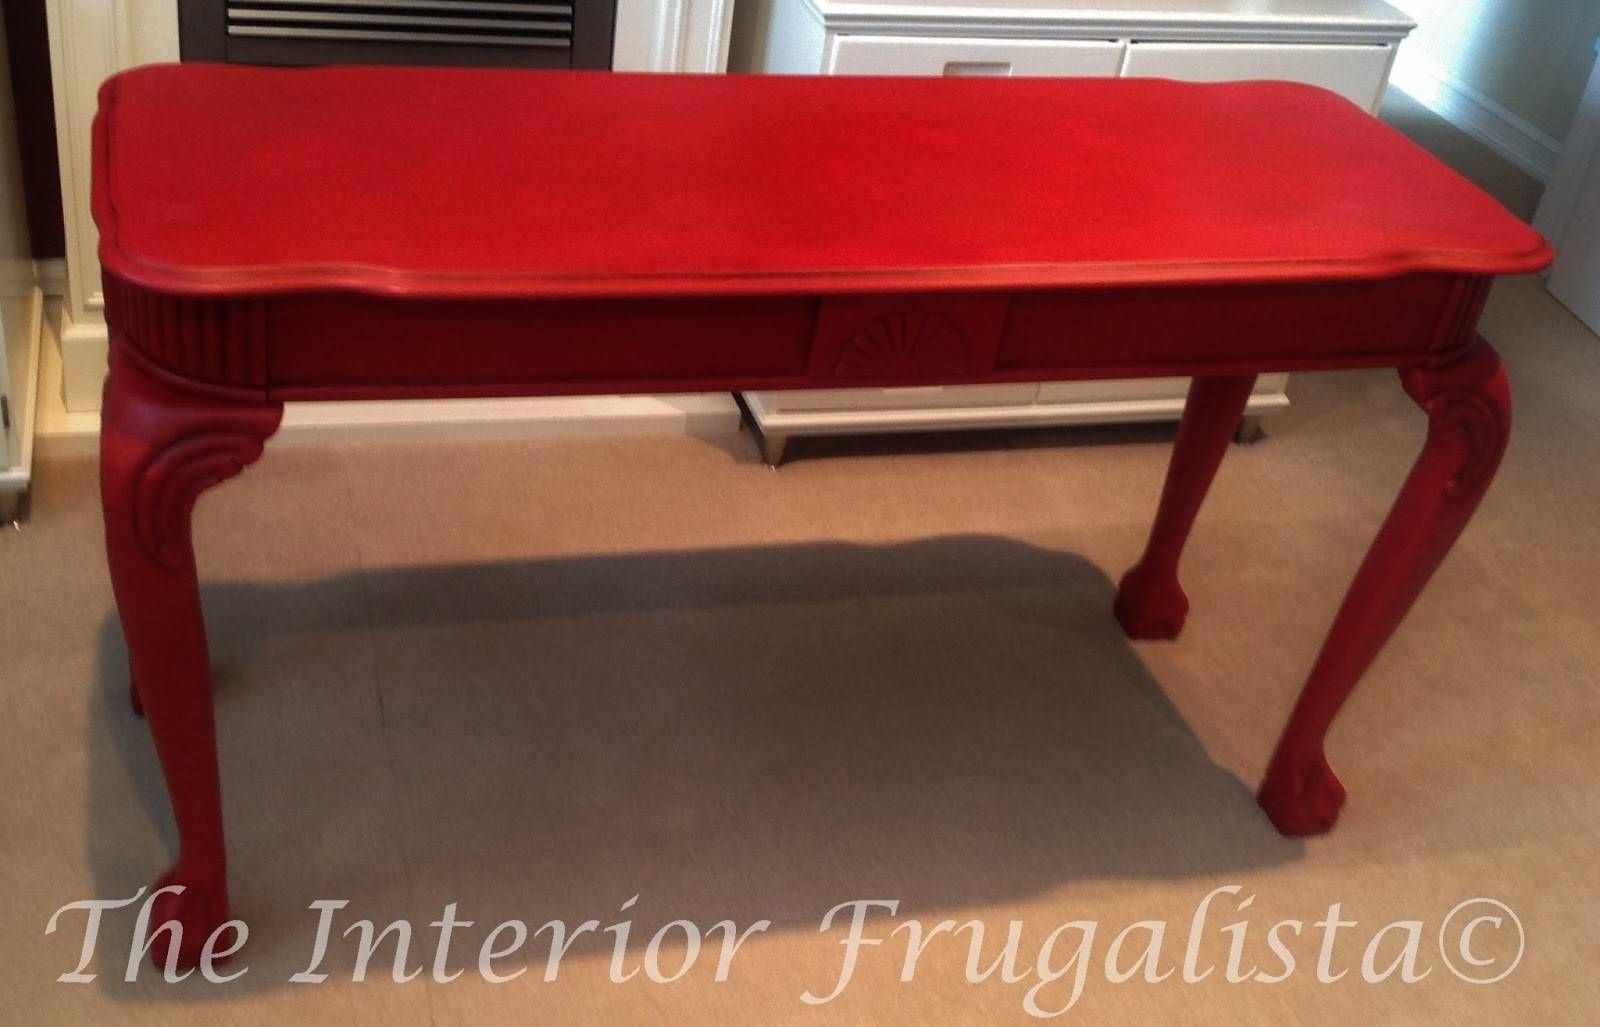 She's A Beauty! | The Interior Frugalista: She's A Beauty! Pertaining To Red Sofa Tables (View 5 of 15)